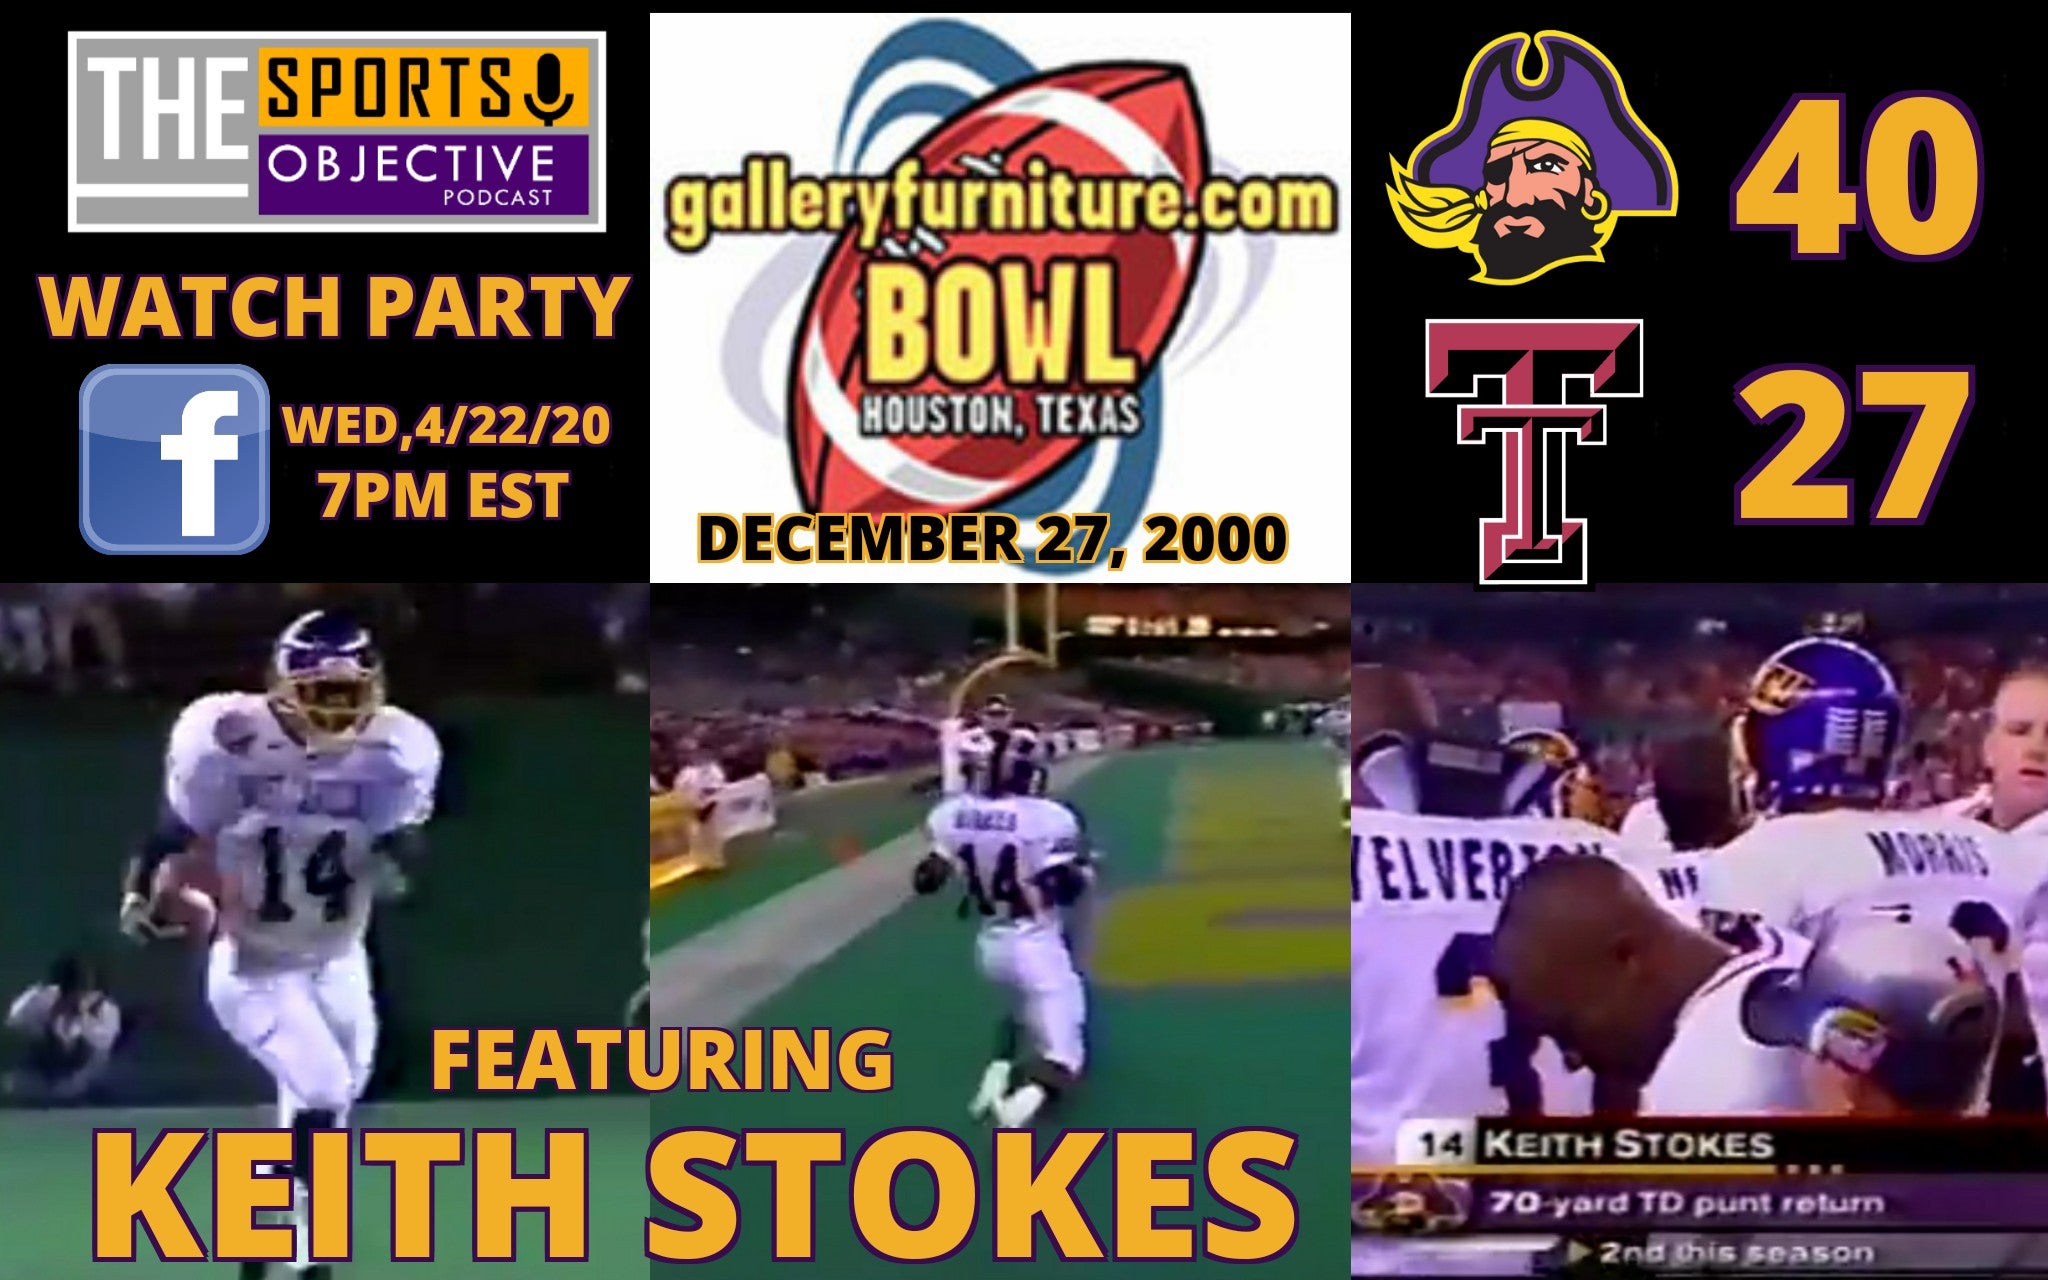 2000 GalleryFurniture.com Bowl Watch Party w/ Keith Stokes!